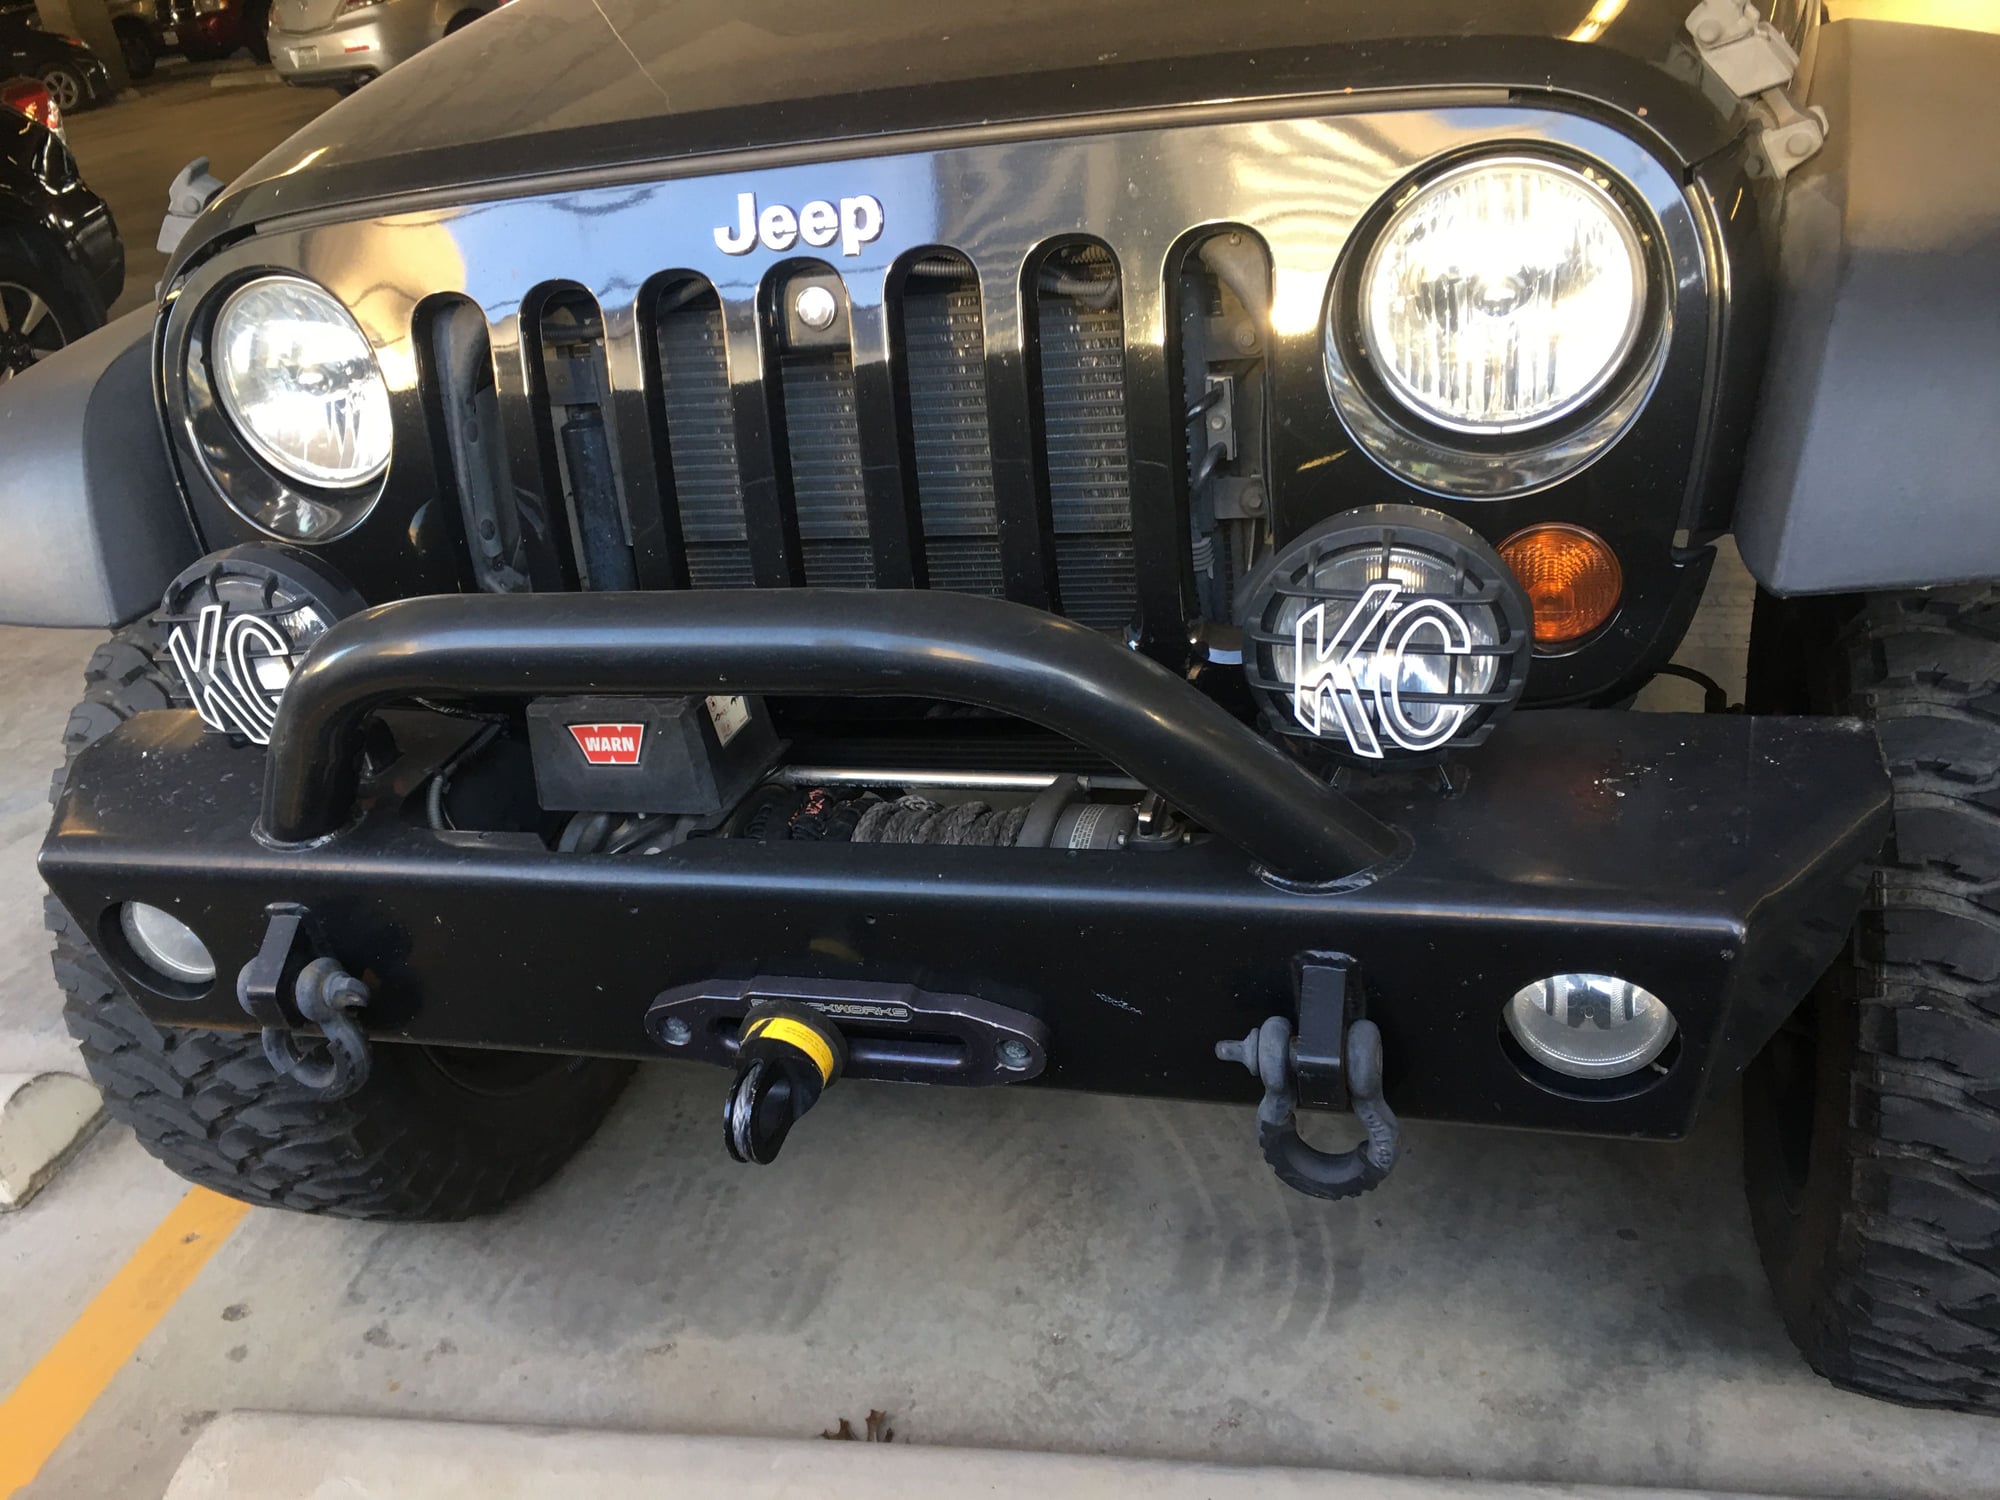 2012 Jeep Wrangler - 2012 Jeep Wrangler unlimited, modified, lifted - Used - VIN Have to check - 138,000 Miles - 6 cyl - Automatic - SUV - Black - Denver, CO 80202, United States